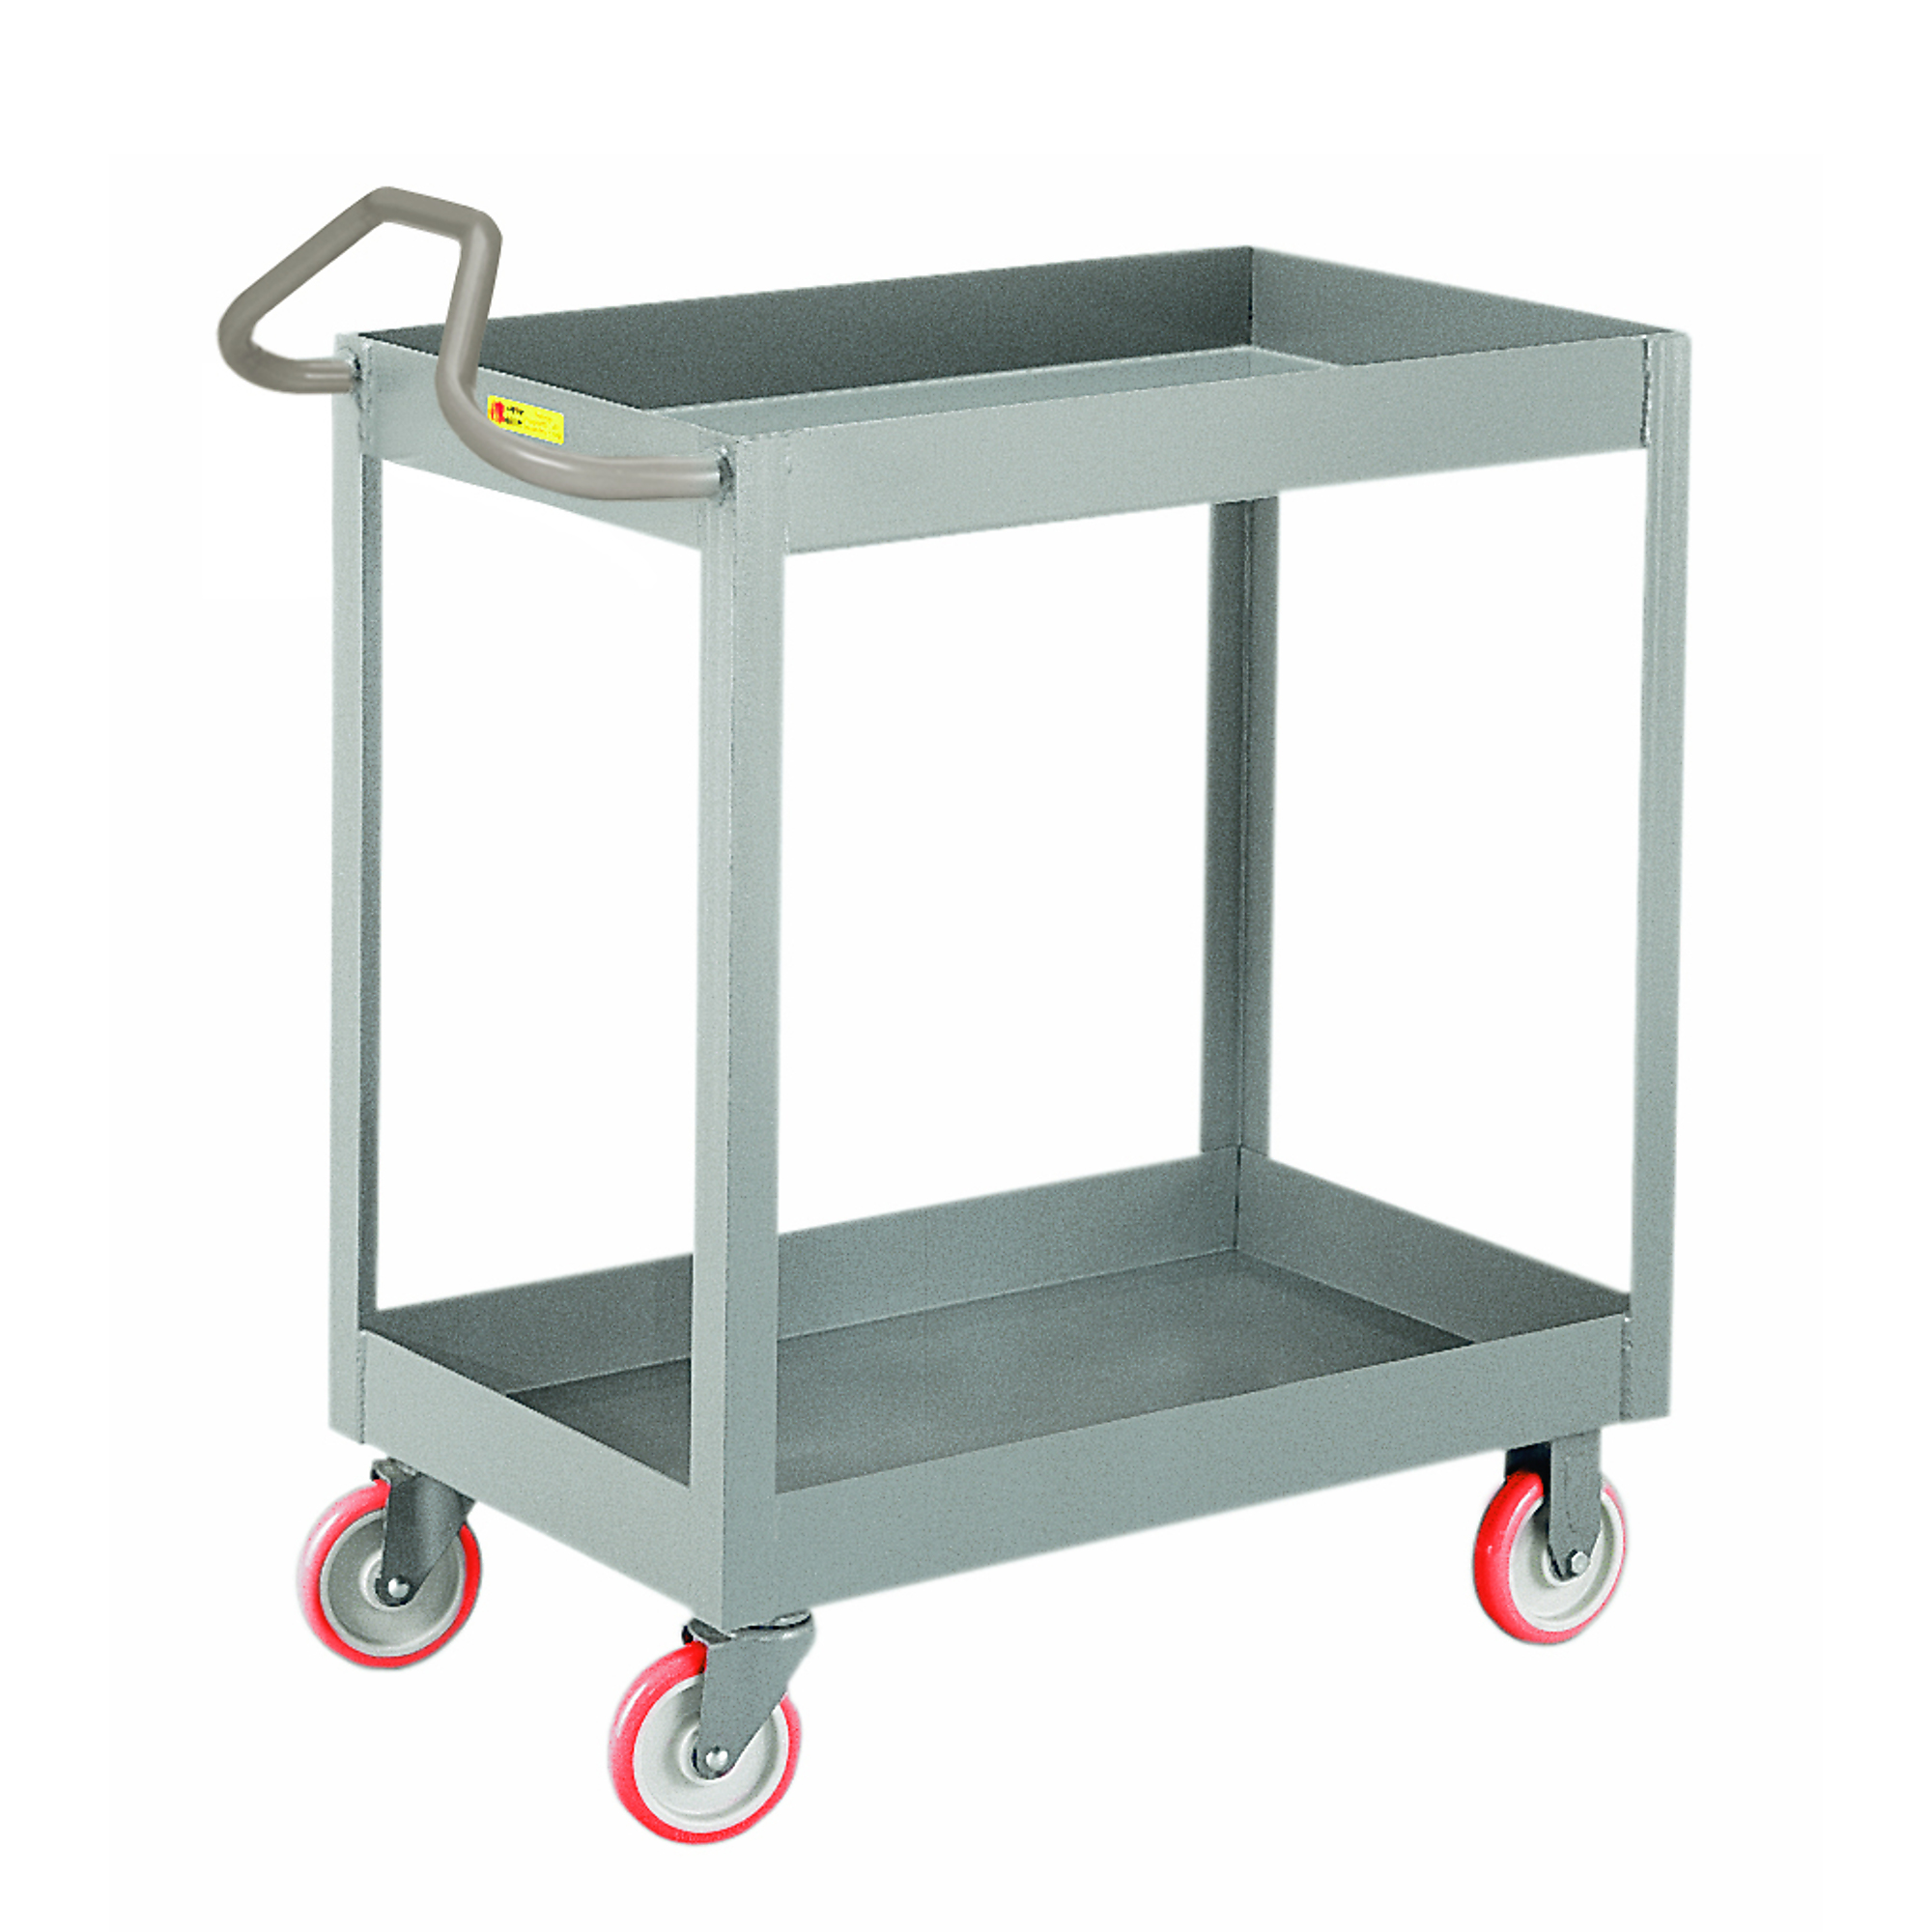 Little Giant, 3Inch Deep Shelf Truck, Ergo Handle, 24x36, 1200 lbs, Total Capacity 1200 lb, Shelves (qty.) 2, Material Carbon Steel, Model ENDS-2436X3